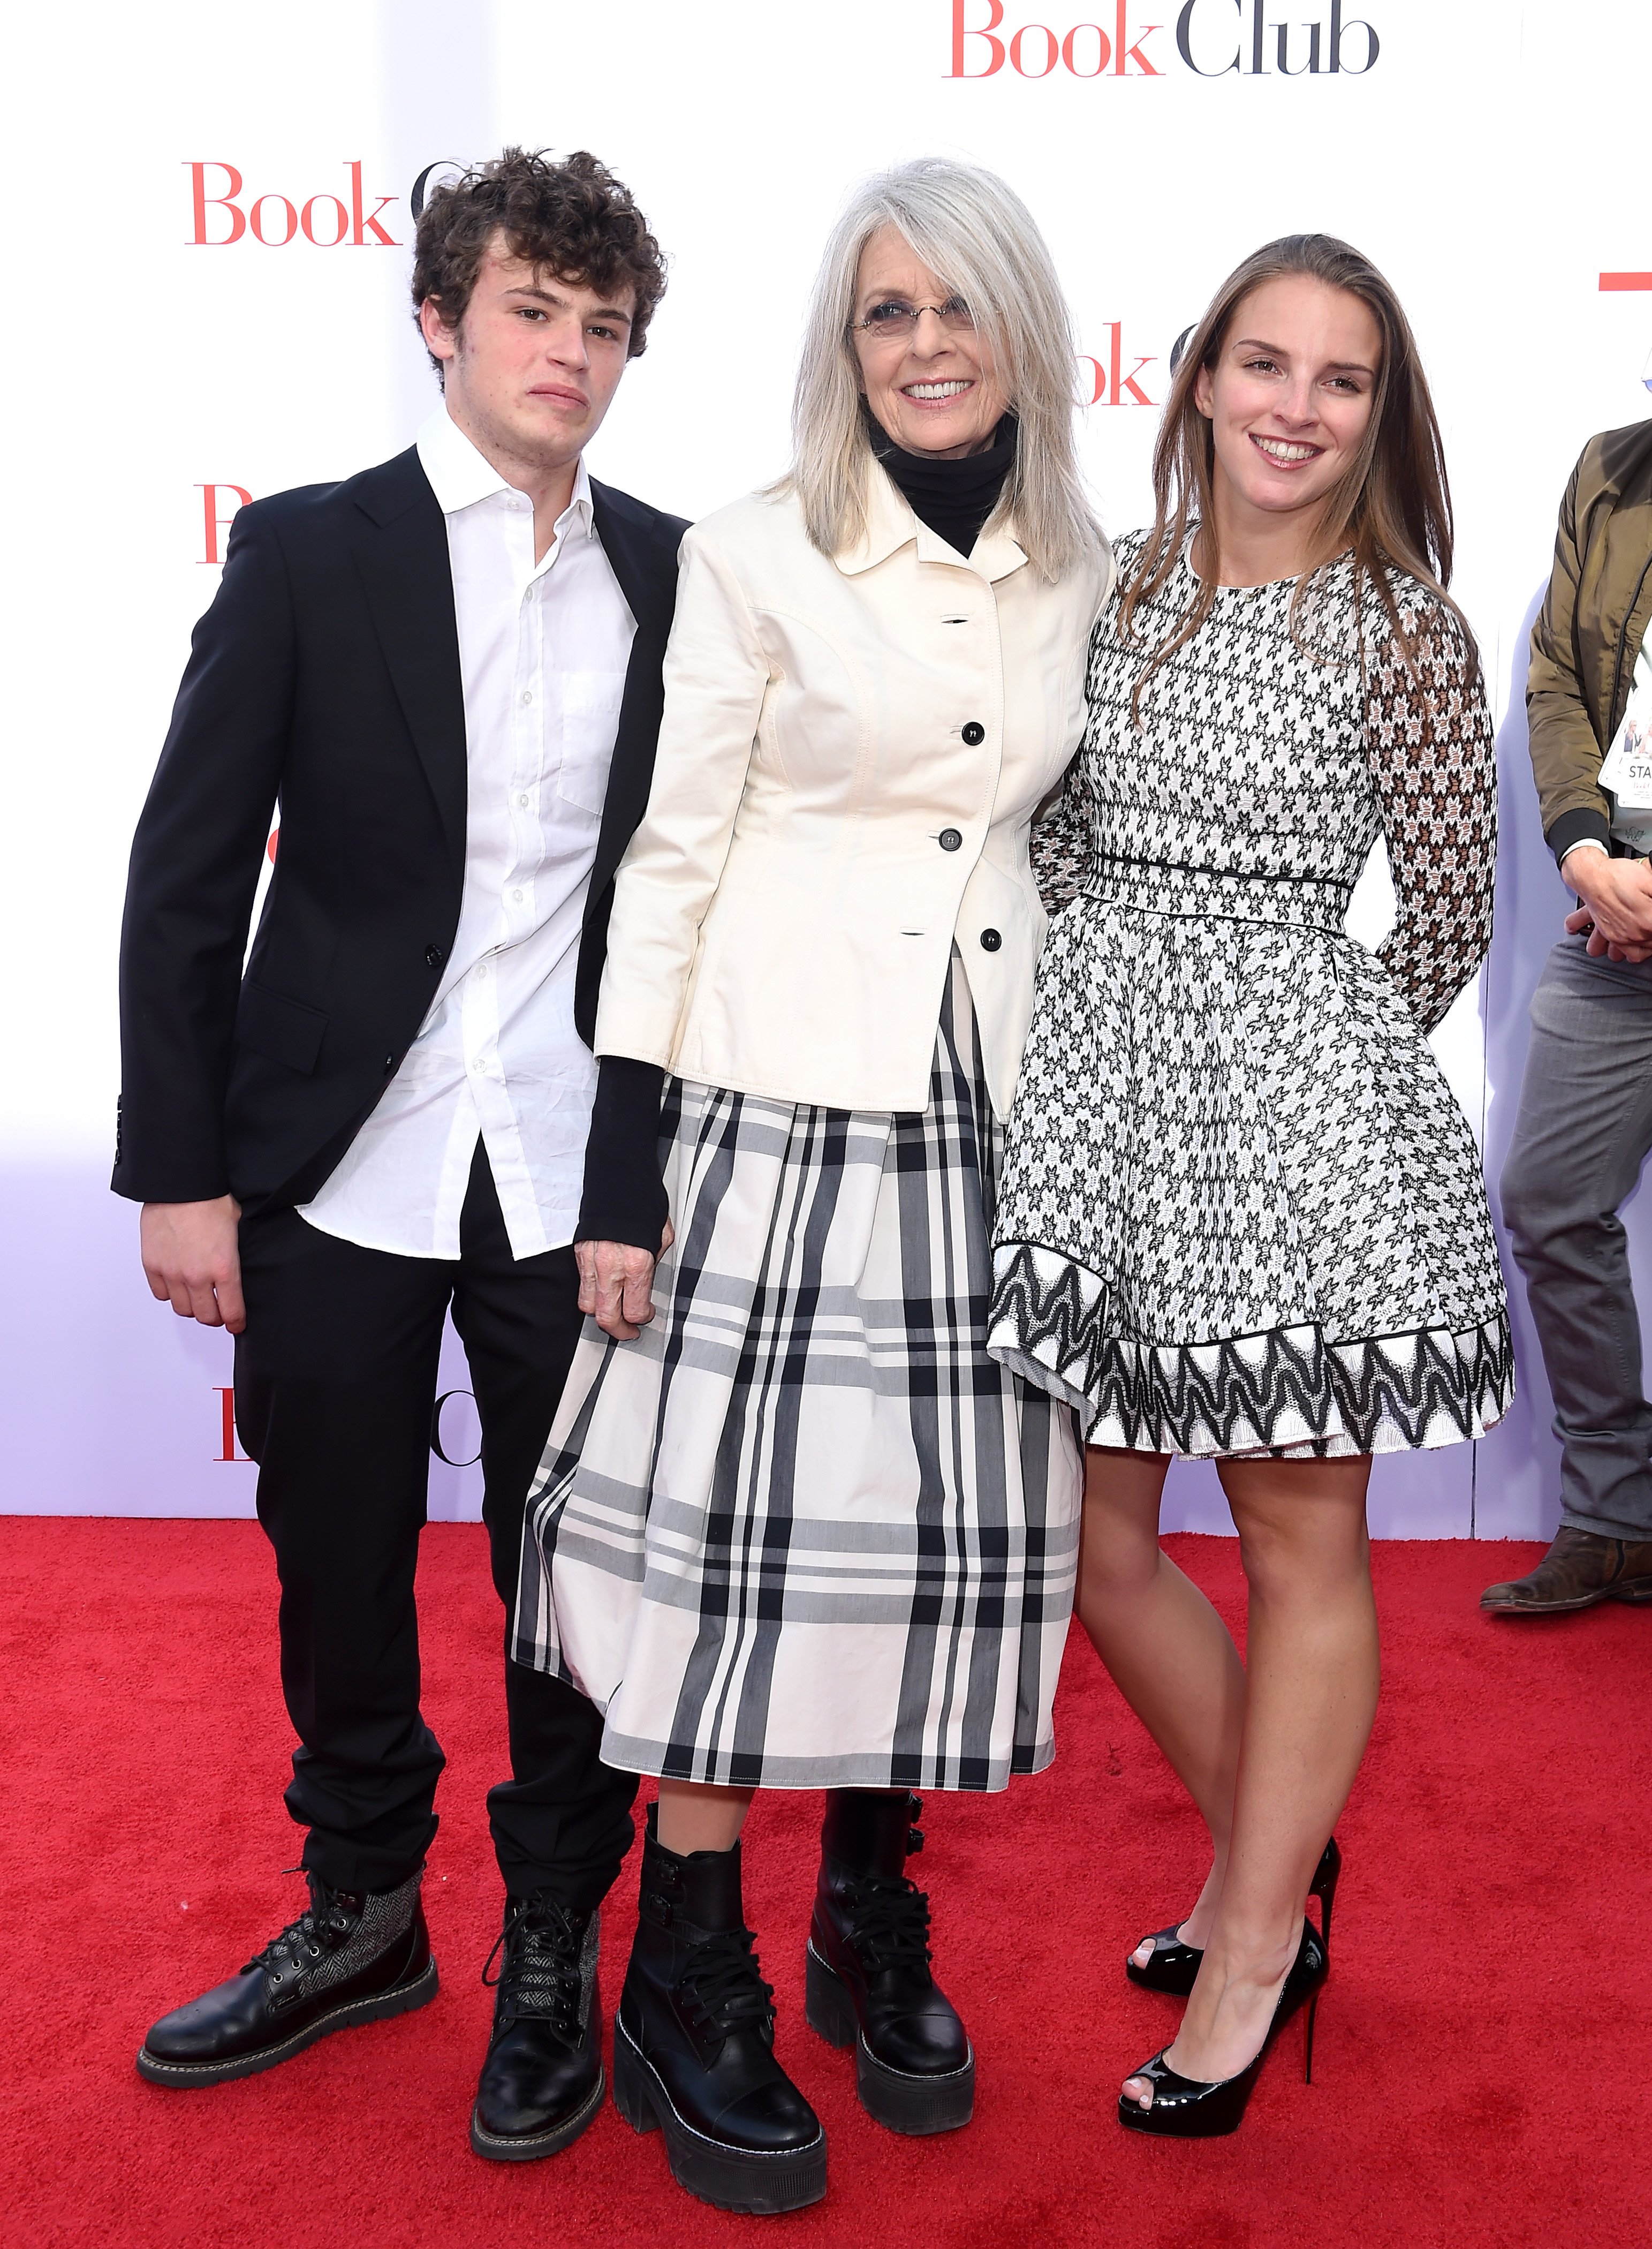 Diane Keaton and her children Duke and Dexter Keaton attend the premiere of Paramount Pictures' "Book Club" at Regency Village Theatre on May 6, 2018, in Westwood, California. | Source: Getty Images